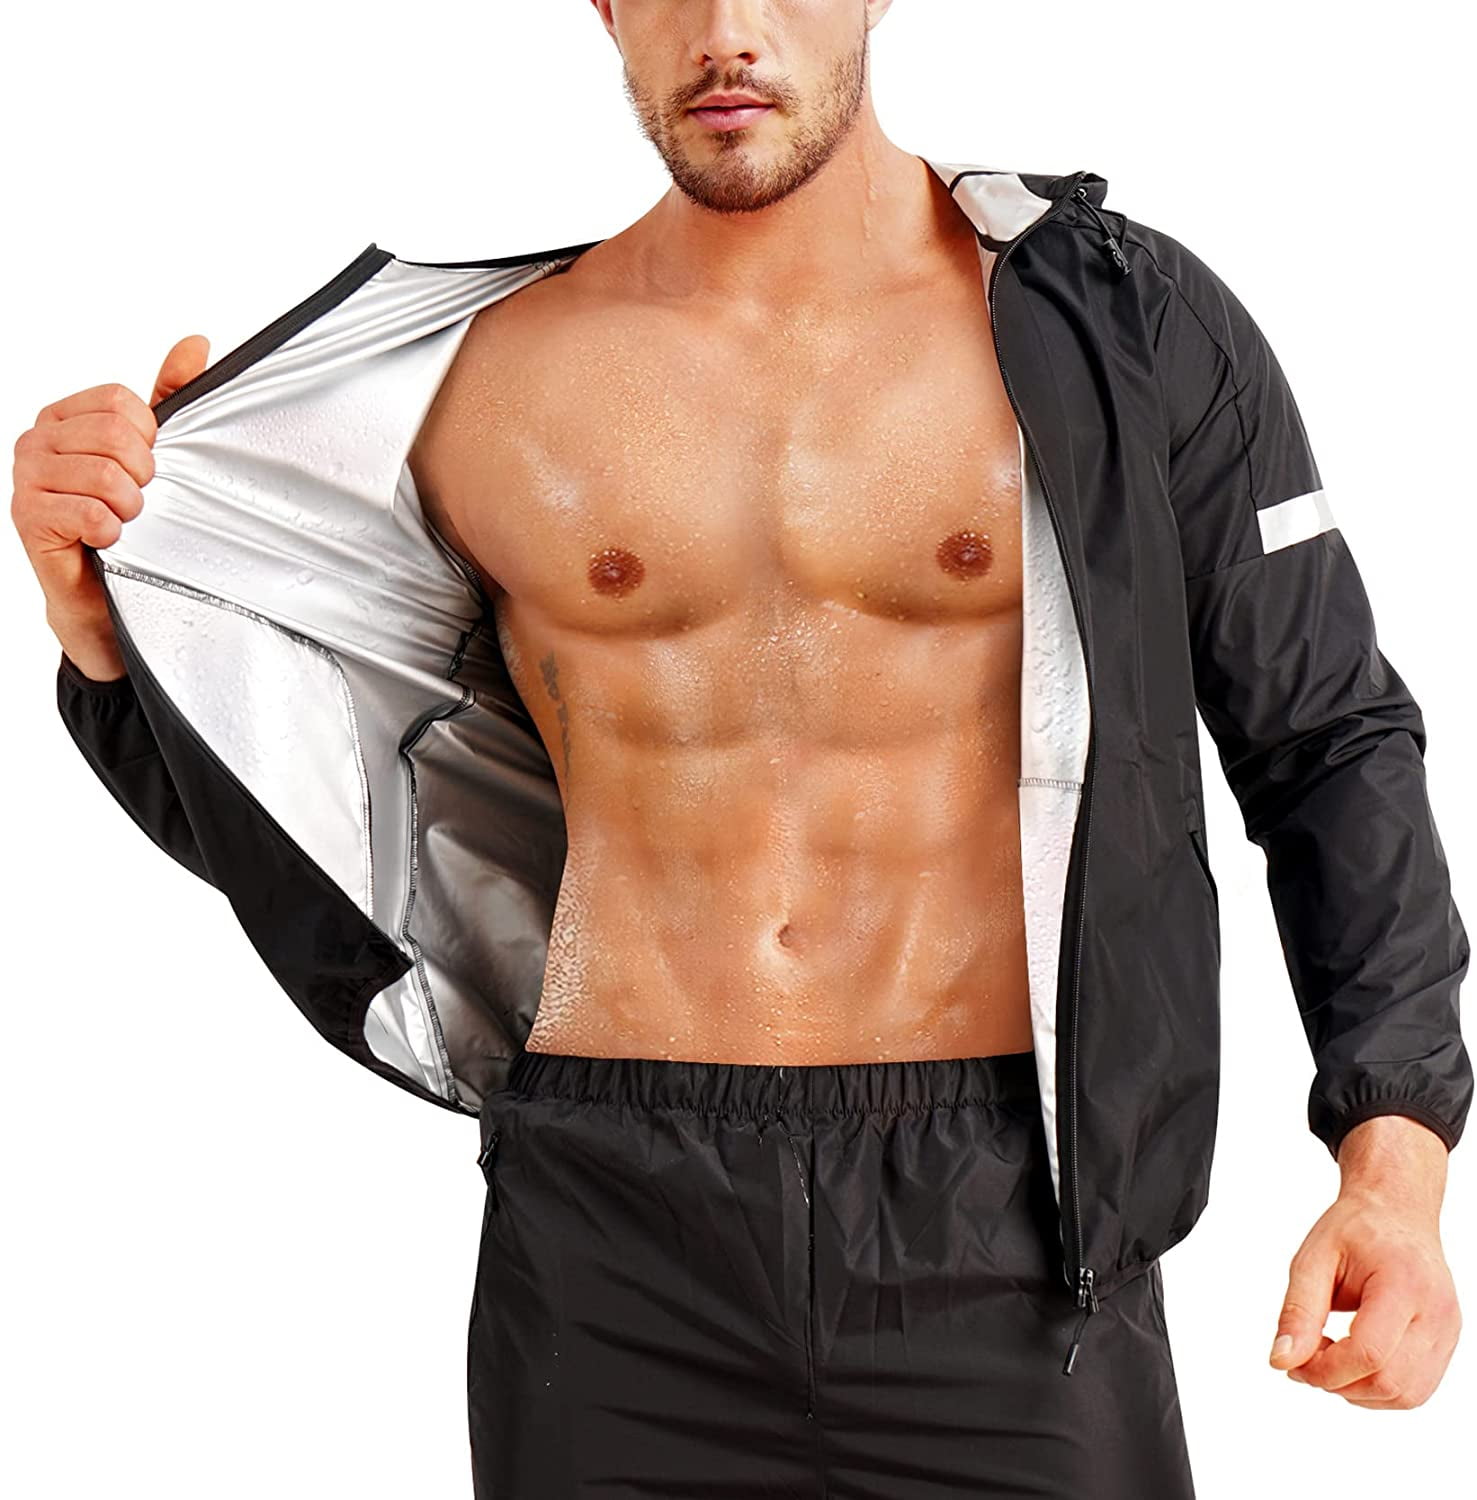 AGILONG Men Sauna Sweat Vest Heat Trapping Compression Shirts Gym Sauna Suit Workout Slimming Body Shaper for Weight Loss 